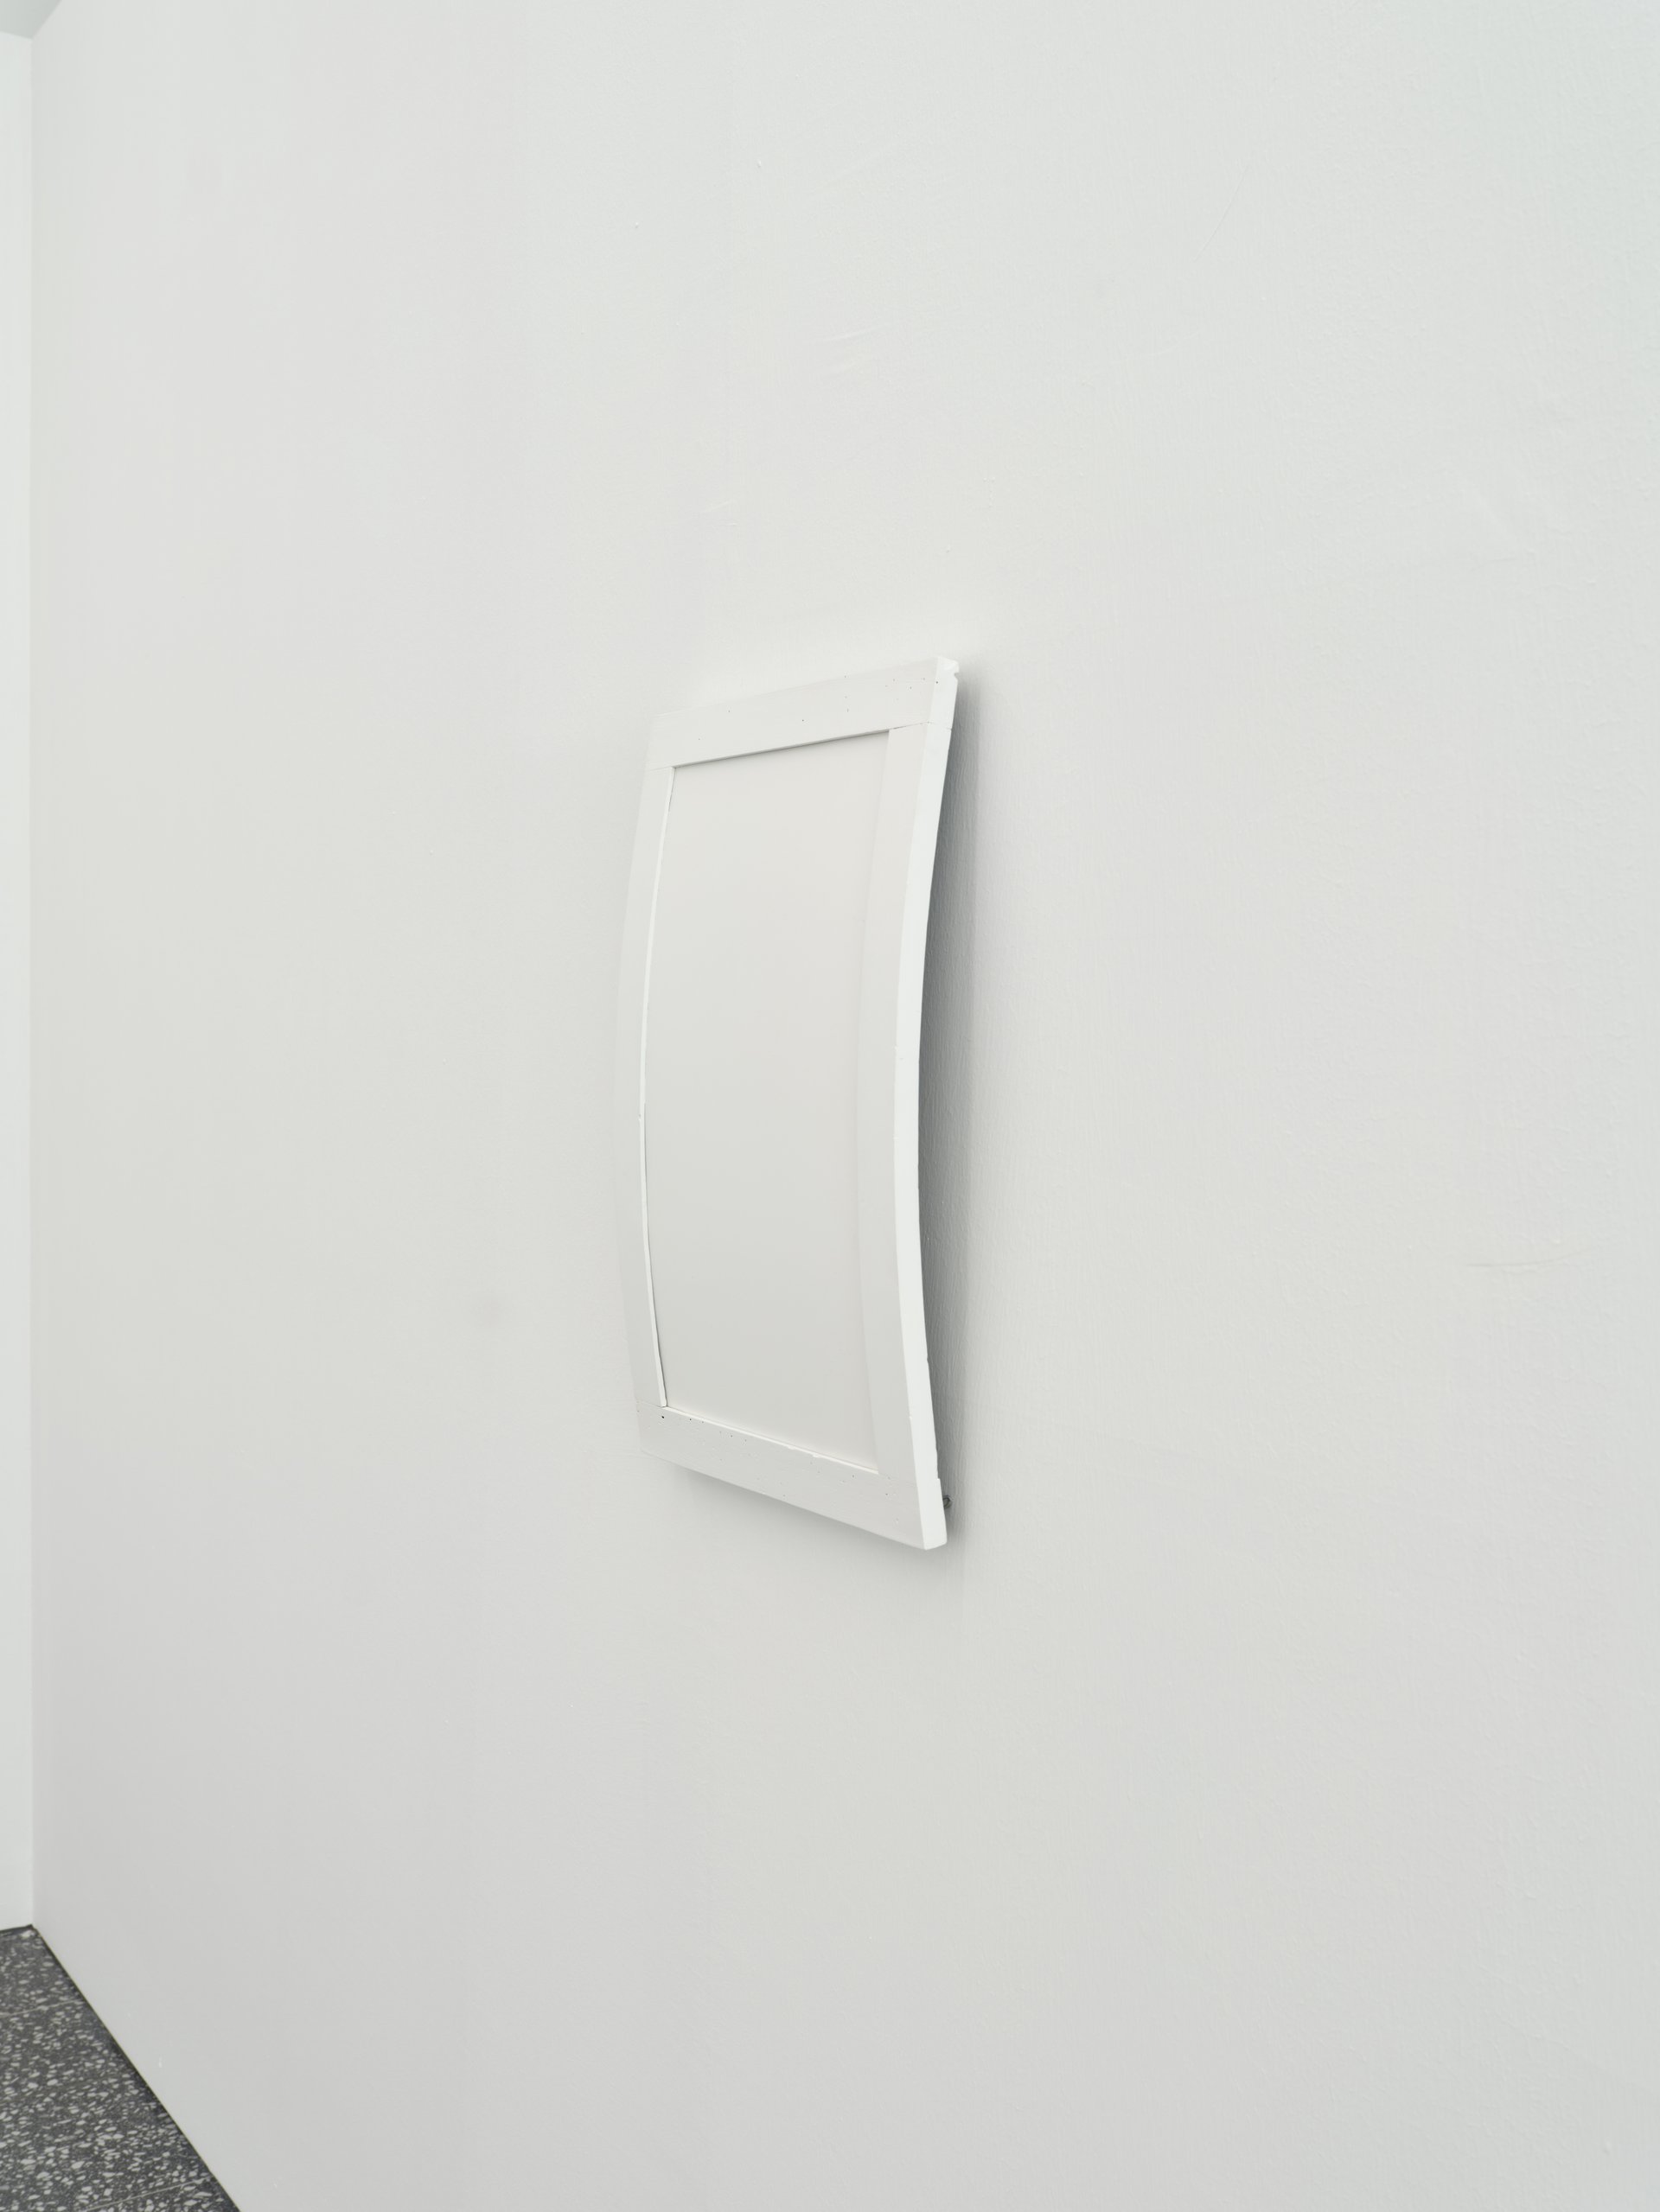 Installation view, Gaylen Gerber, Support, n.d. oil paint on distortion mirror, Germany, ca. 1920, 59.6 x 38.7 x 6.5 cm (23½ x 15¼ x 2½ inches)